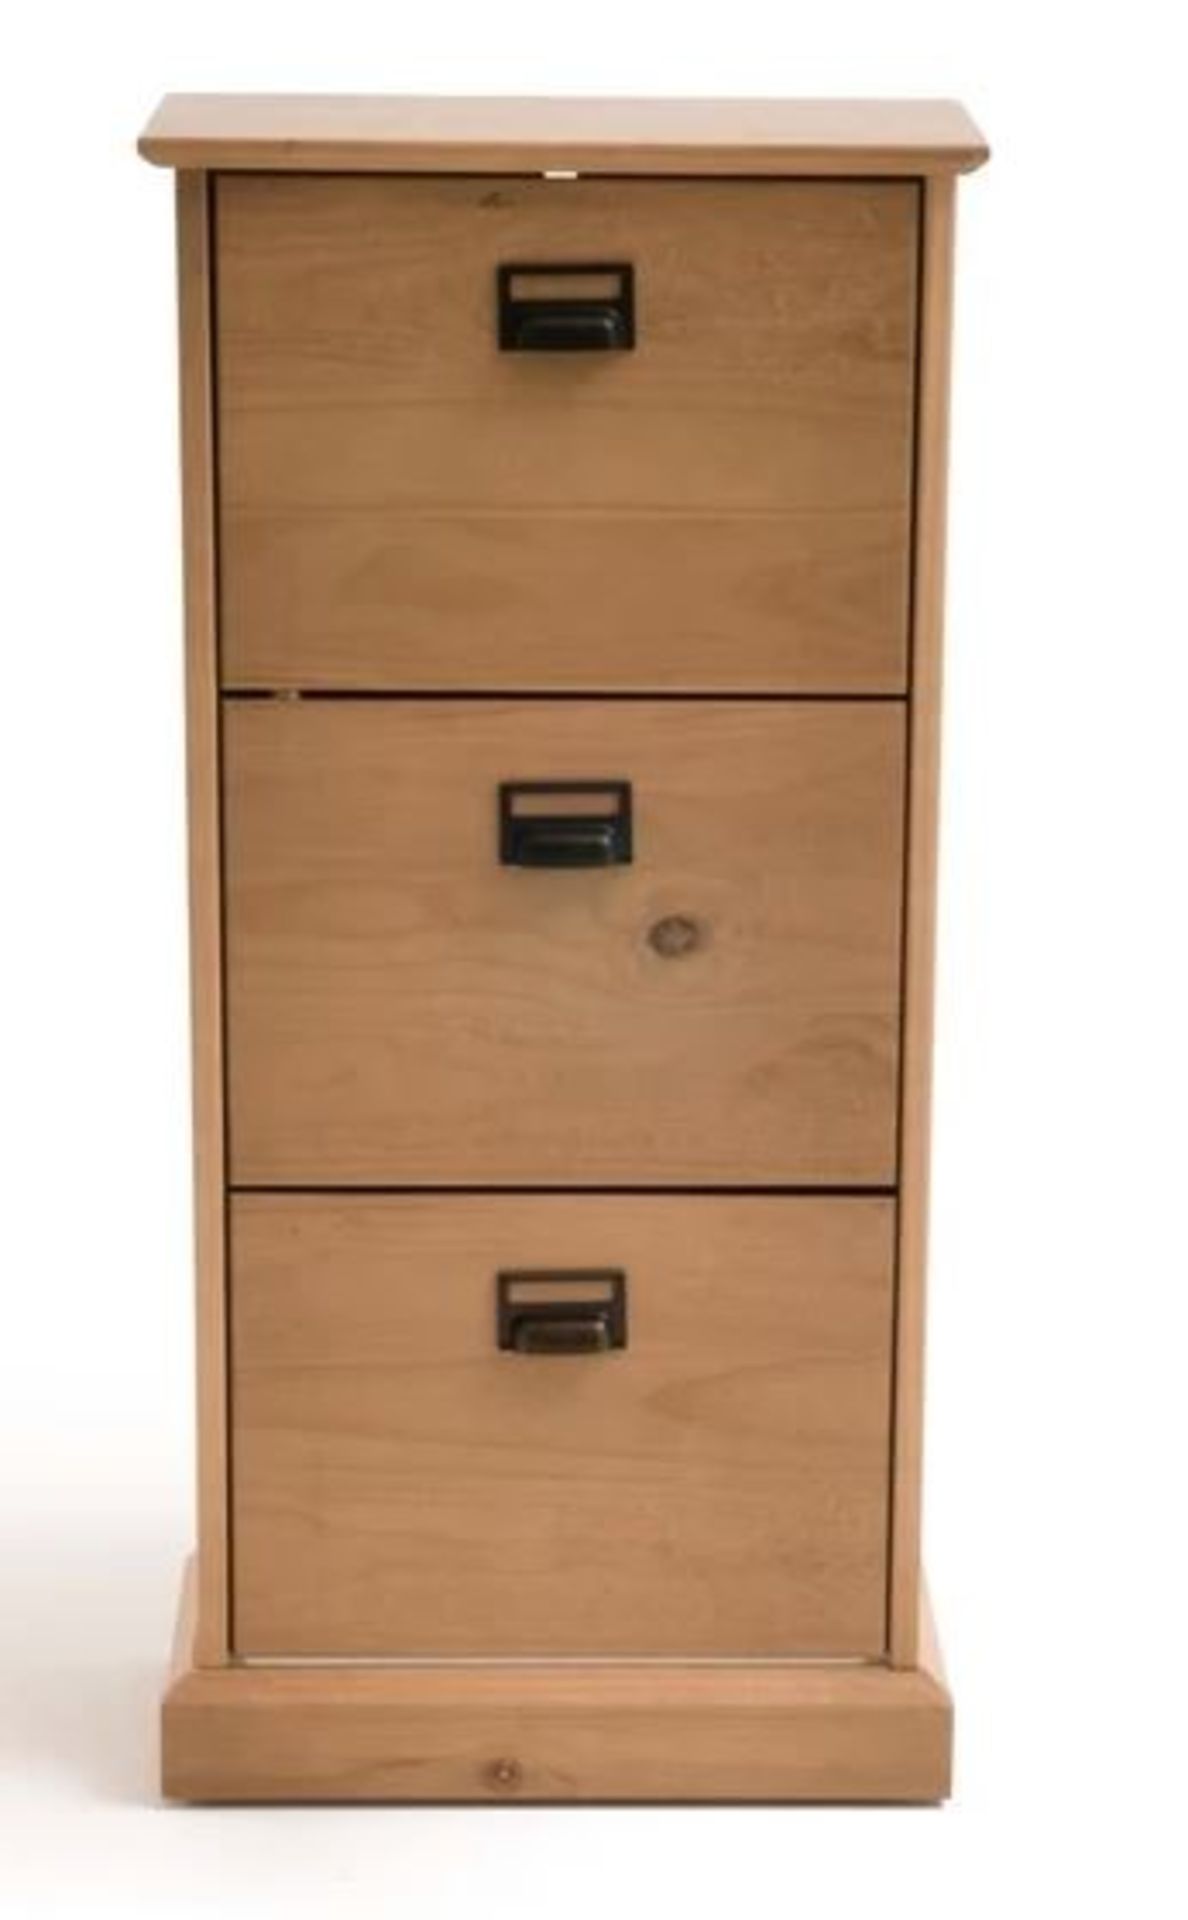 1 GRADE B BOXED DESIGNER LINDLEY SHOE CABINET WITH 3 PULL DOWN DOORS IN A LIGHT OAK FINISH / RRP £